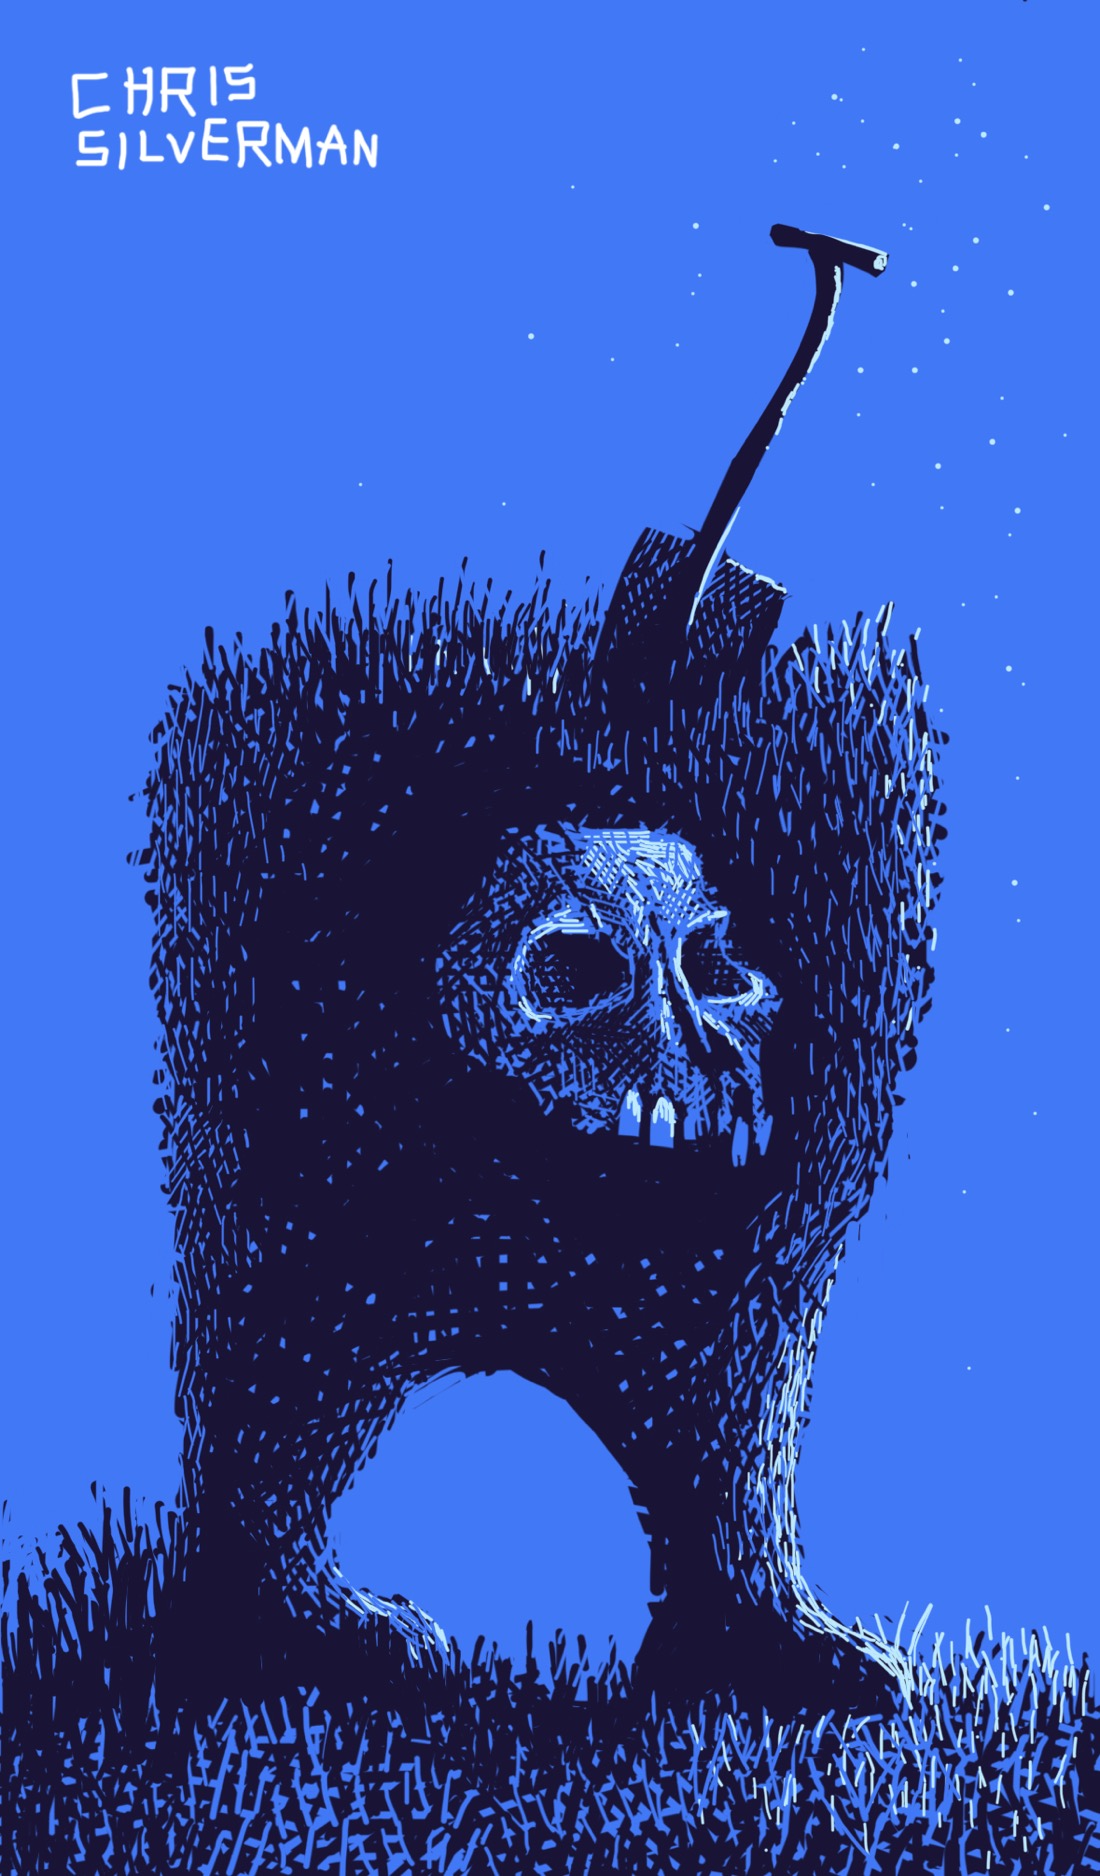 A large torso with two legs and no arms. Where the head and shoulders would be is a grassy surface. This is the lower half of a creature, made from soil. The creature stands on a field at night. No moon is visible, but there seems to be moonlight reflecting off the creature. Stuck in the grassy top part of the creature is a short shovel. Buried inside the creature is a crumbling skull, off which the moonlight is also reflecting even though it's totally buried in the soil. This is a black drawing on a dark blue surface, with the moonlight rendered in very pale blue.